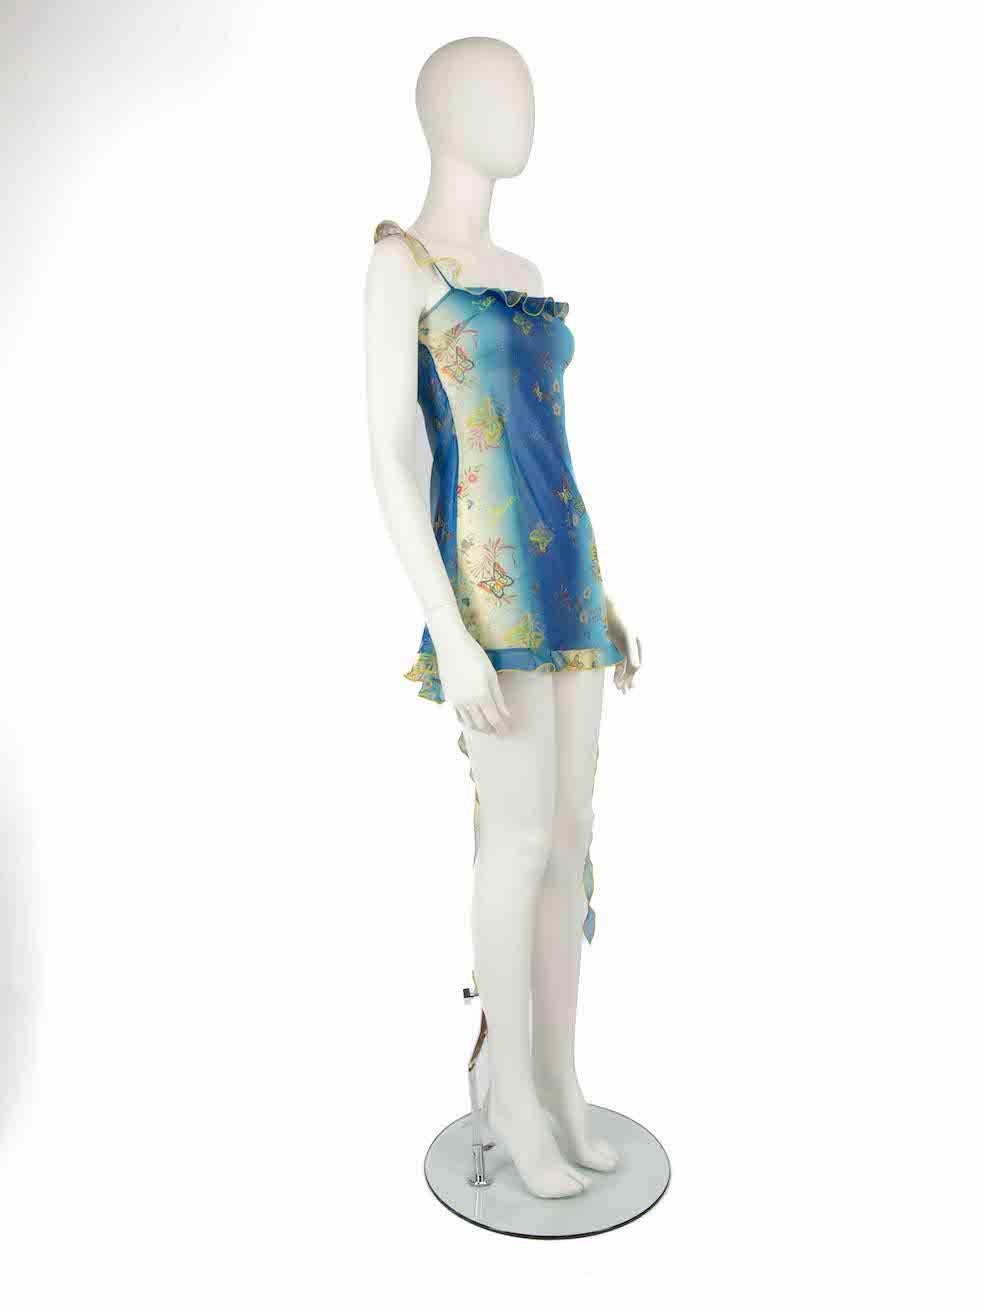 CONDITION is Never worn, with tags. No visible wear to top is evident on this new SIEDRÉS designer resale item.
 
 Details
 Kyla model
 Multicolour
 Silk
 Mini dress
 Floral pattern
 Sheer
 Ruffles accent
 One shoulder
 Side zip closure
 
 
 Made in